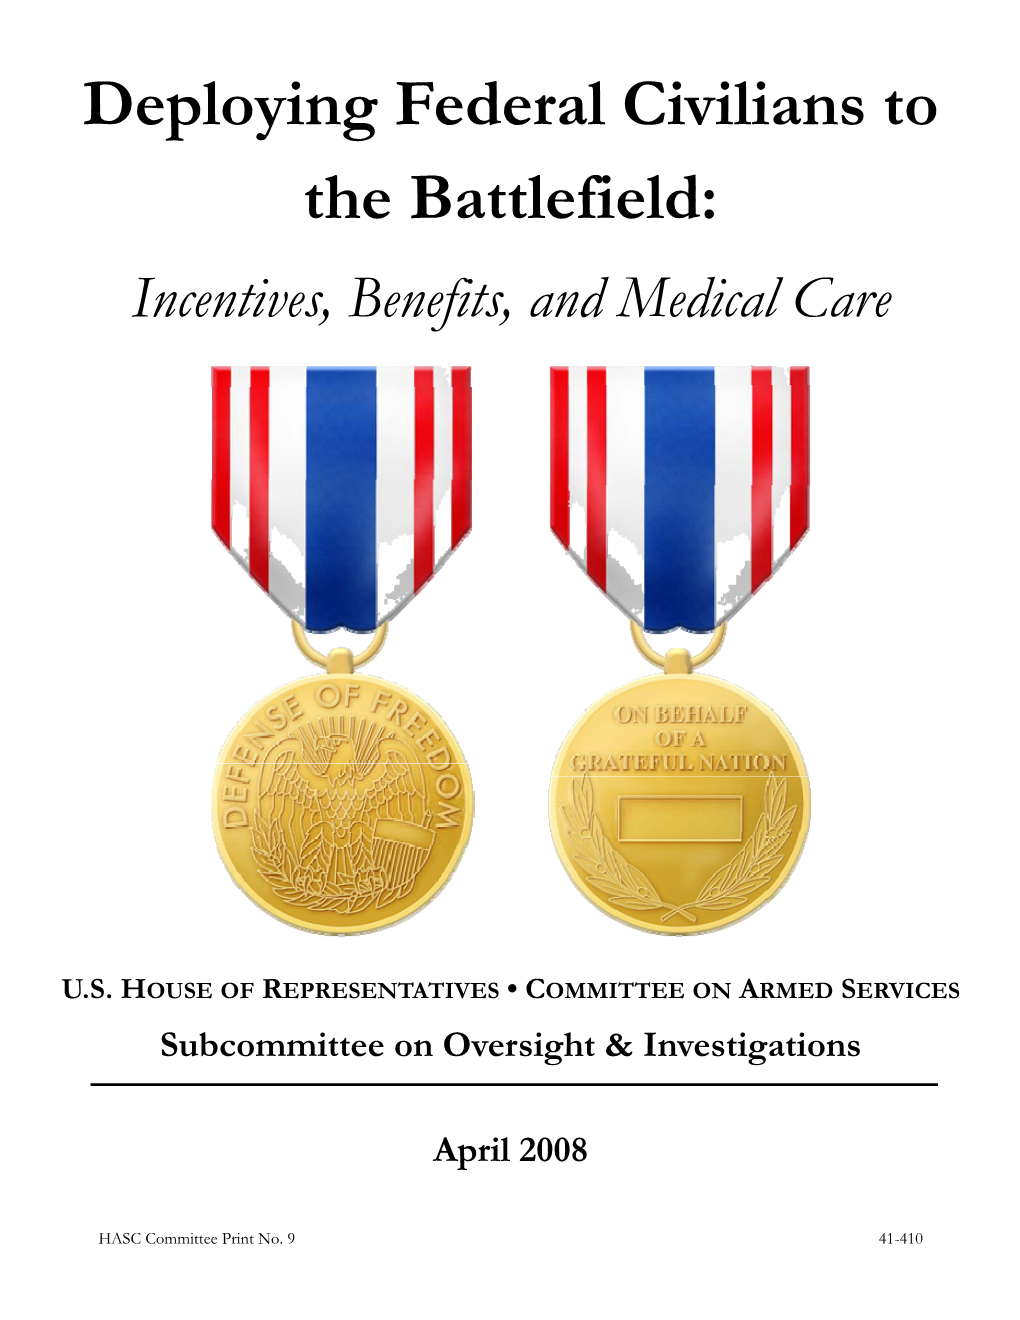 Deploying Federal Civilians to the Battlefield: Incentives, Benefits, and Medical Care